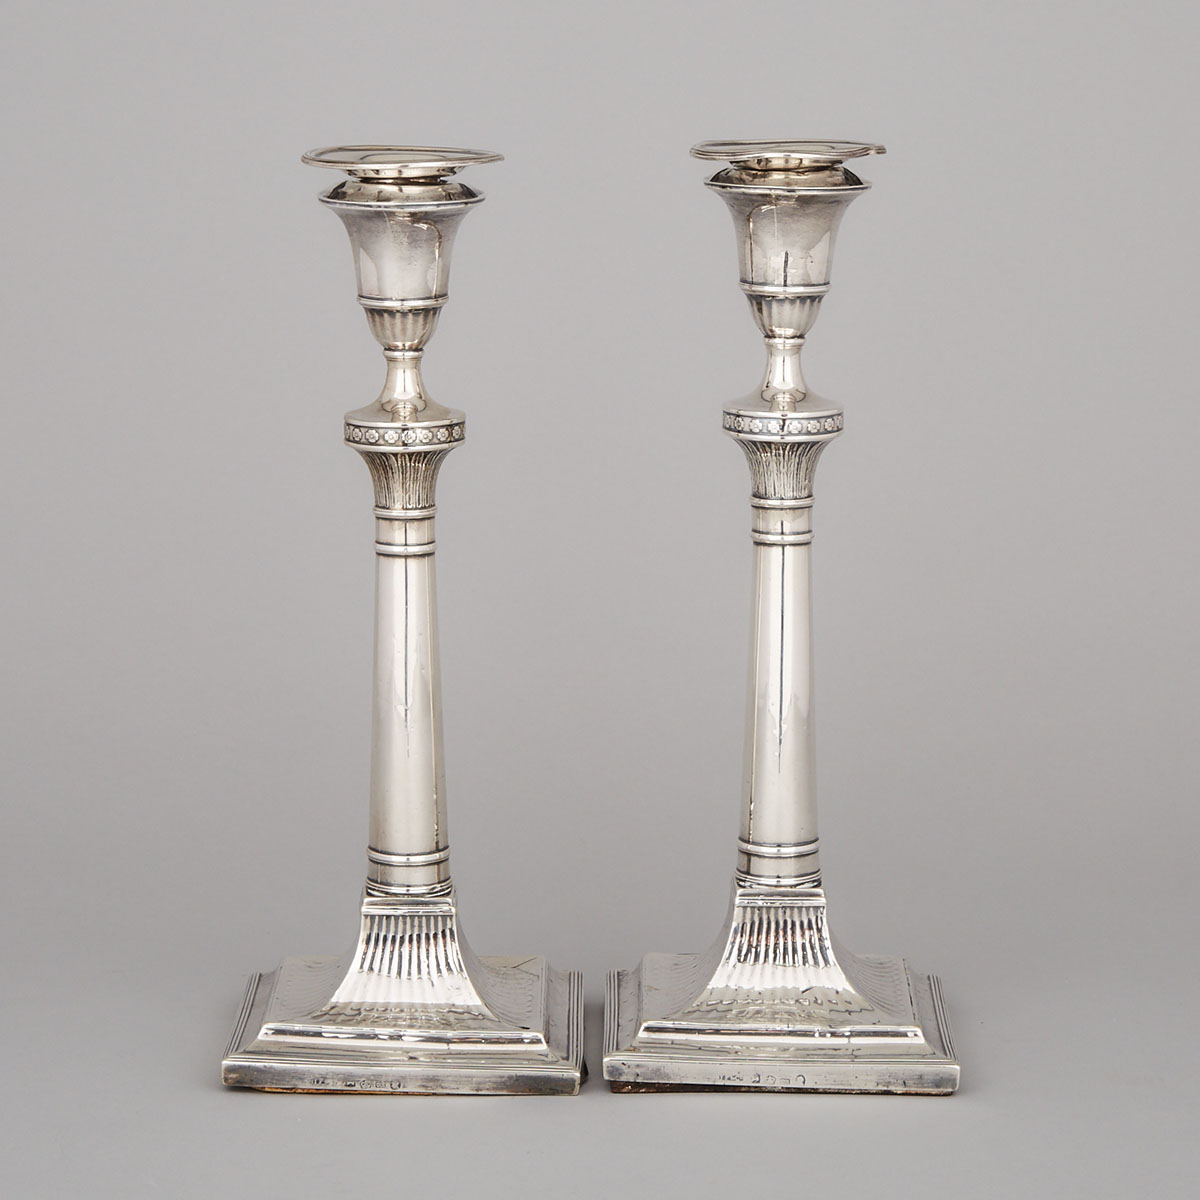 Pair of George III Silver Table Candlesticks, John Parsons & Co., Sheffield, 1788